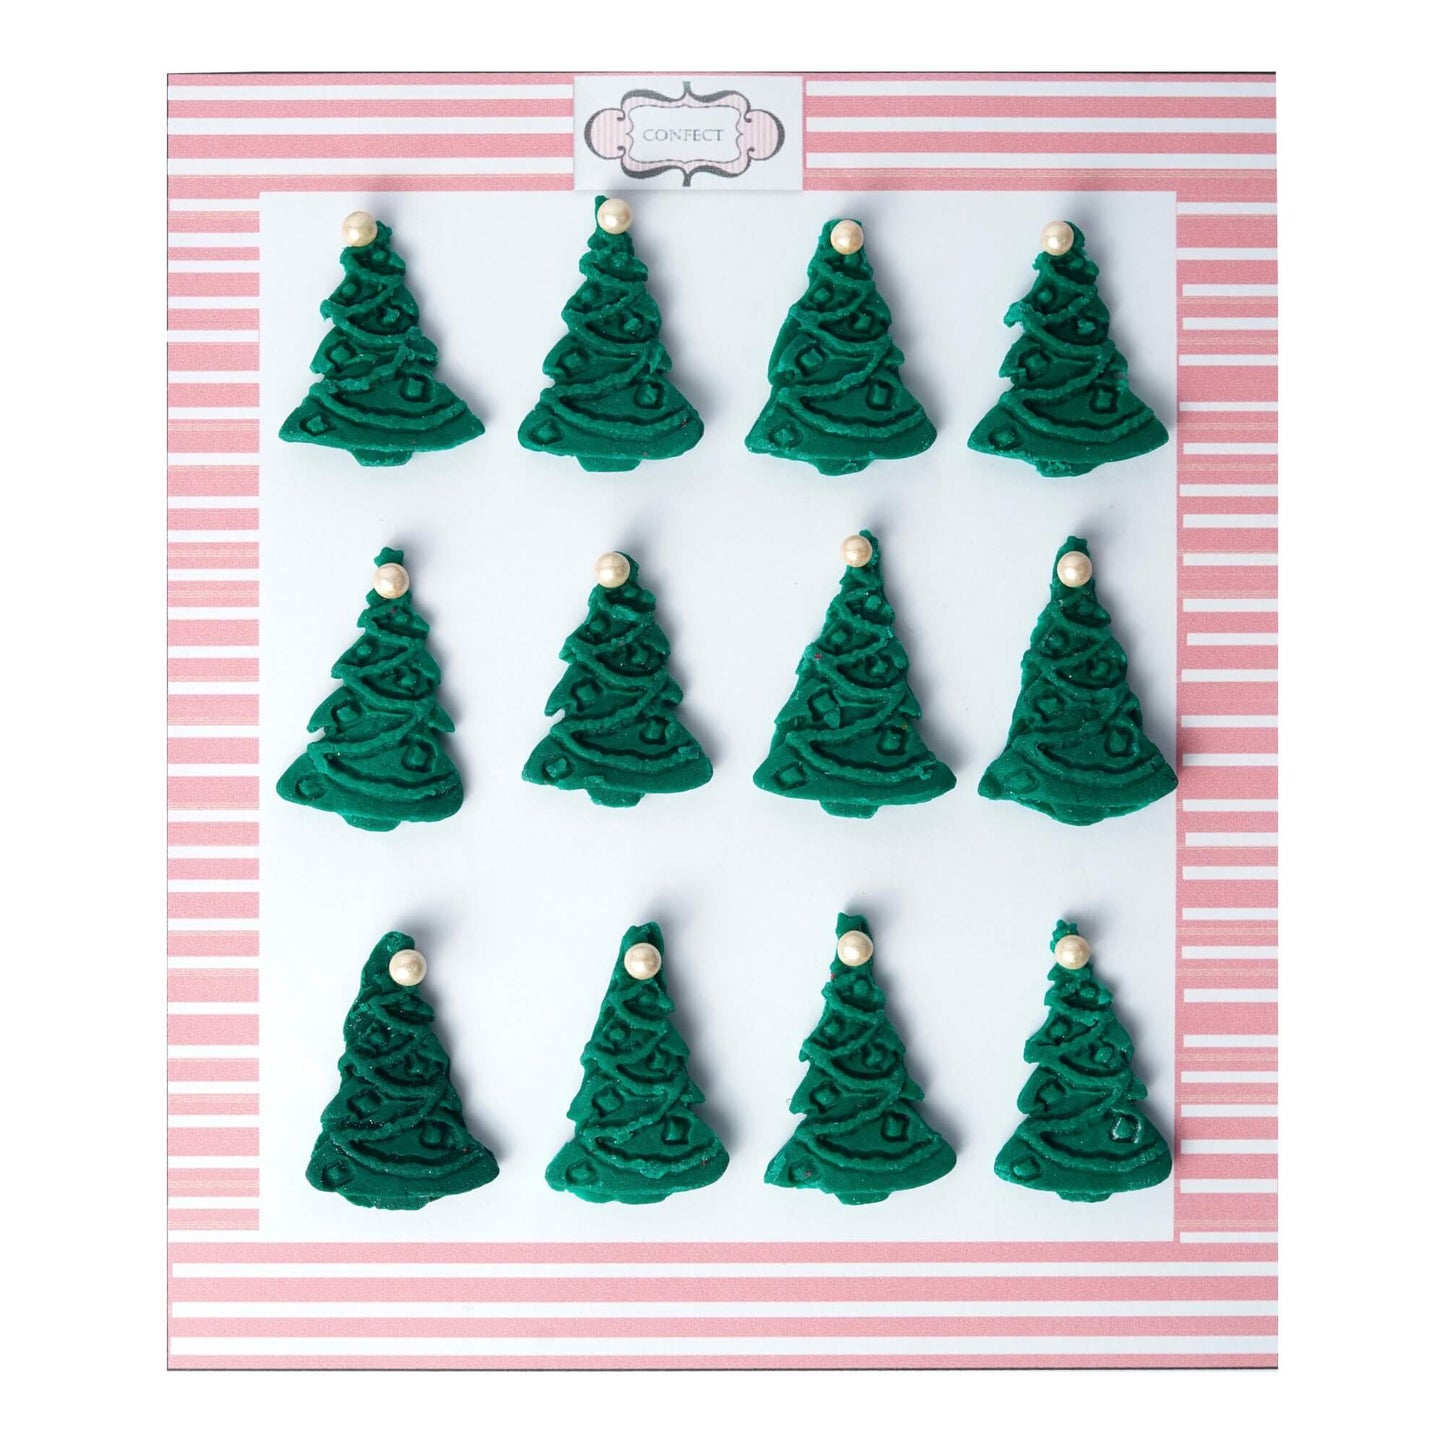 Confect Green Christmas Tree CC 6 60 gms